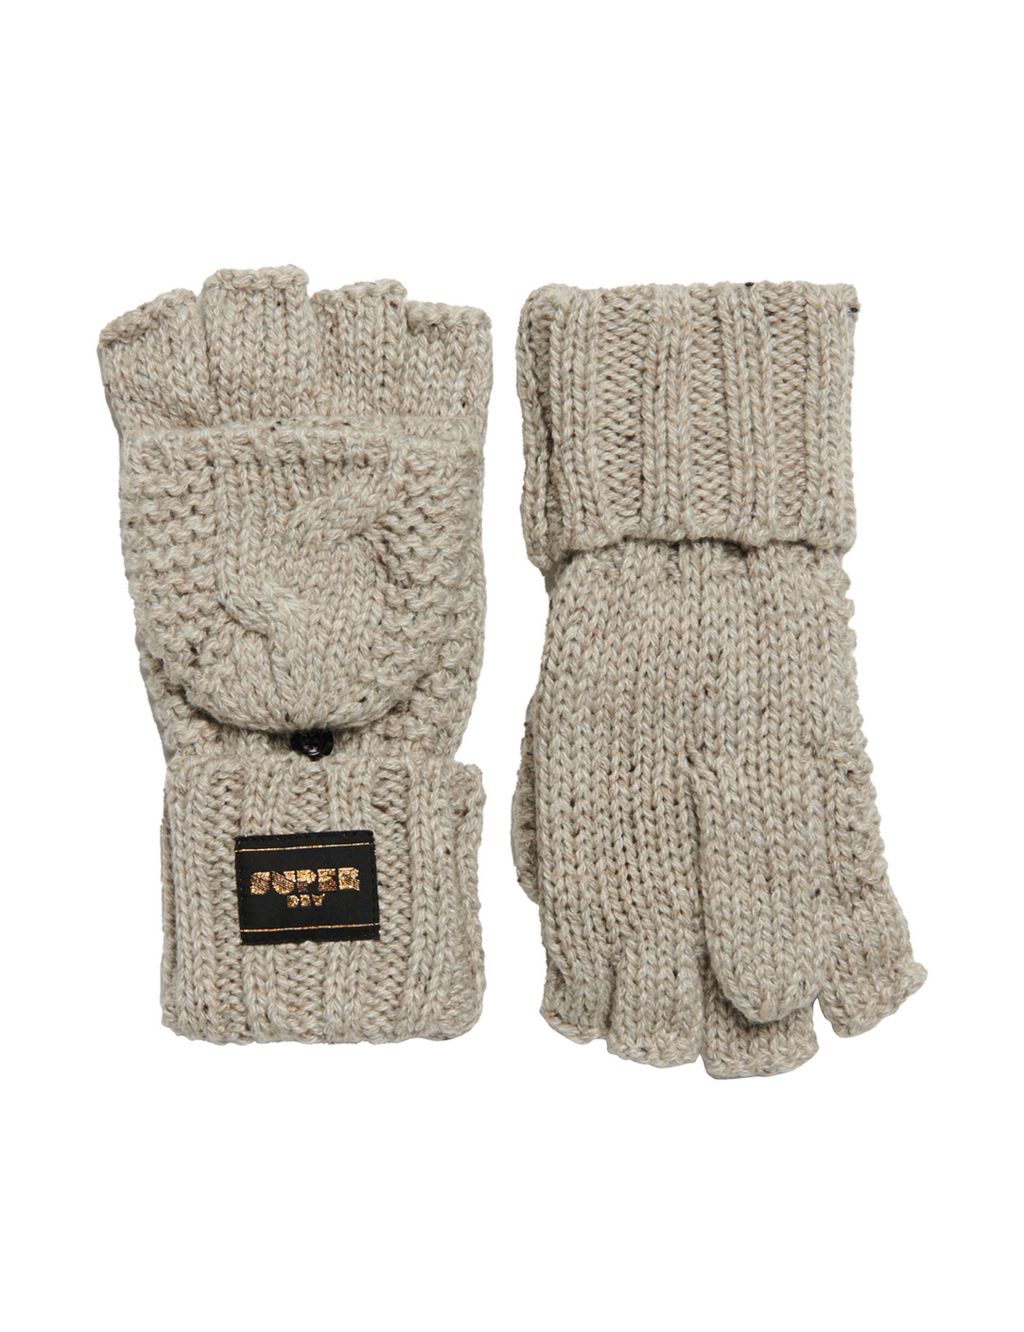 Knitted Cable Gloves with Wool image 3